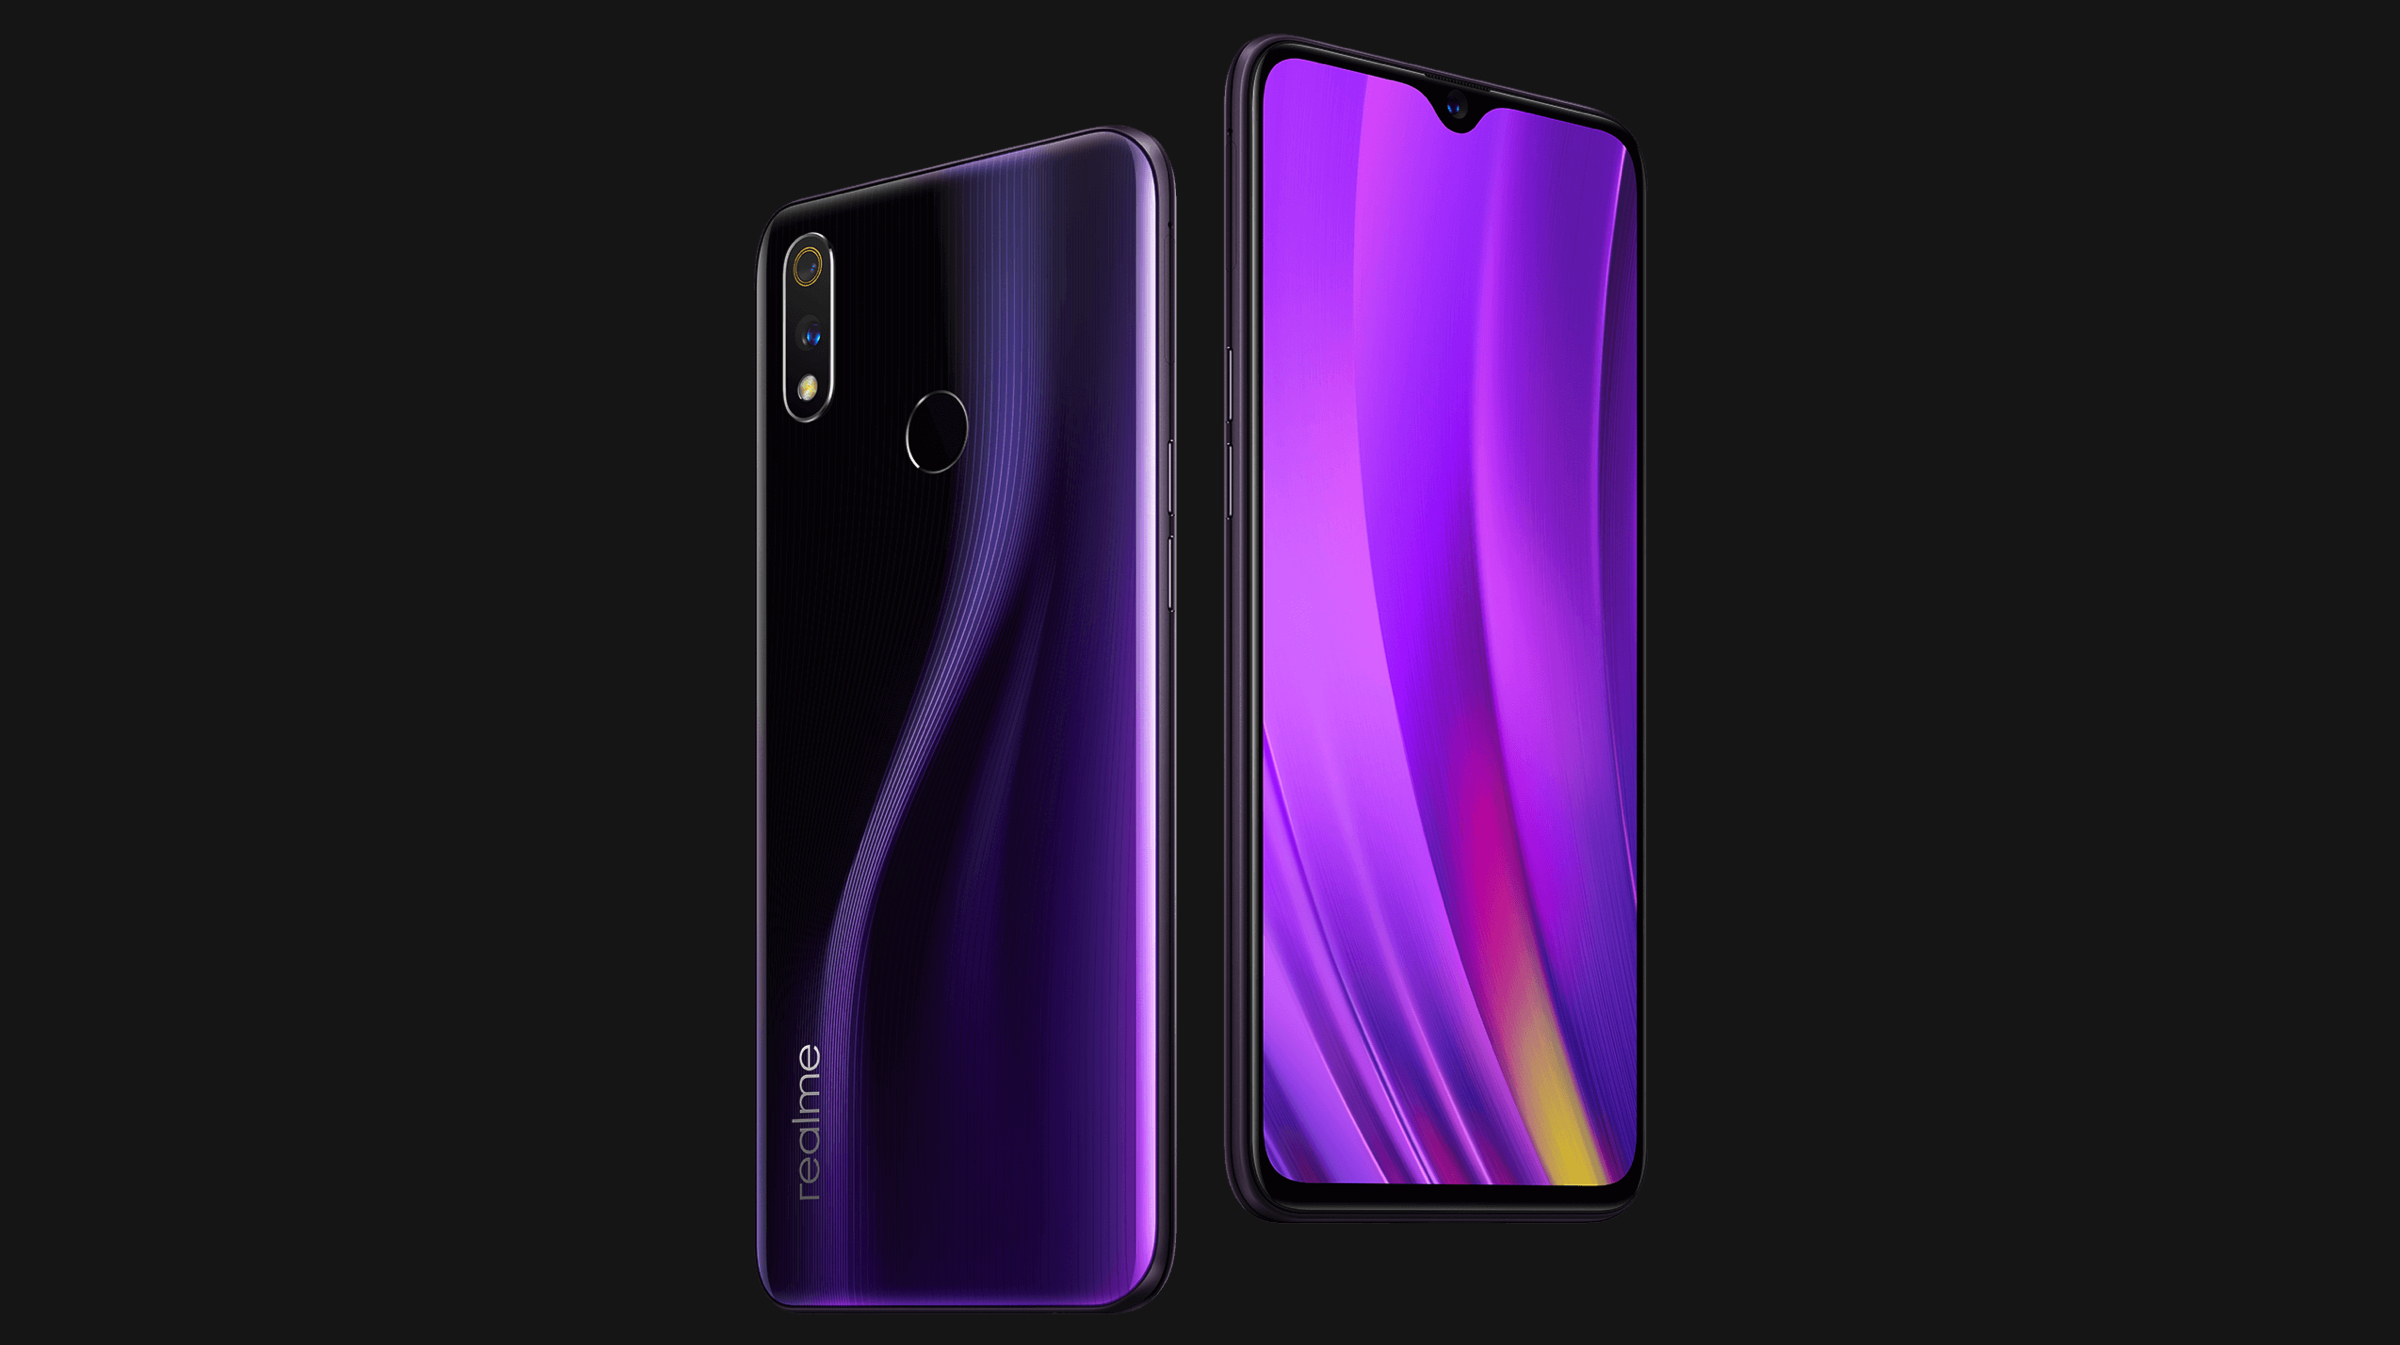 The OS and performance of Realme 3 Pro